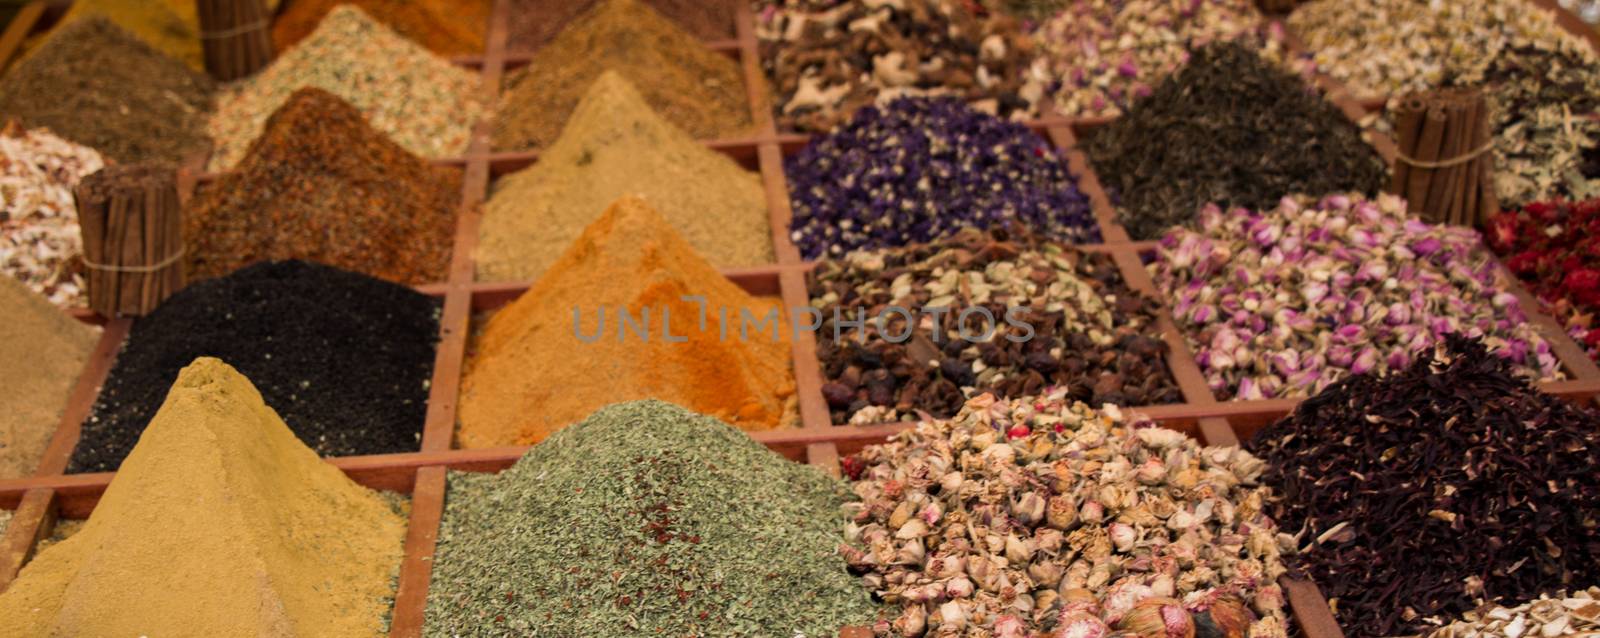 Spices and tea at the Spice Market in Istanbul by berkay